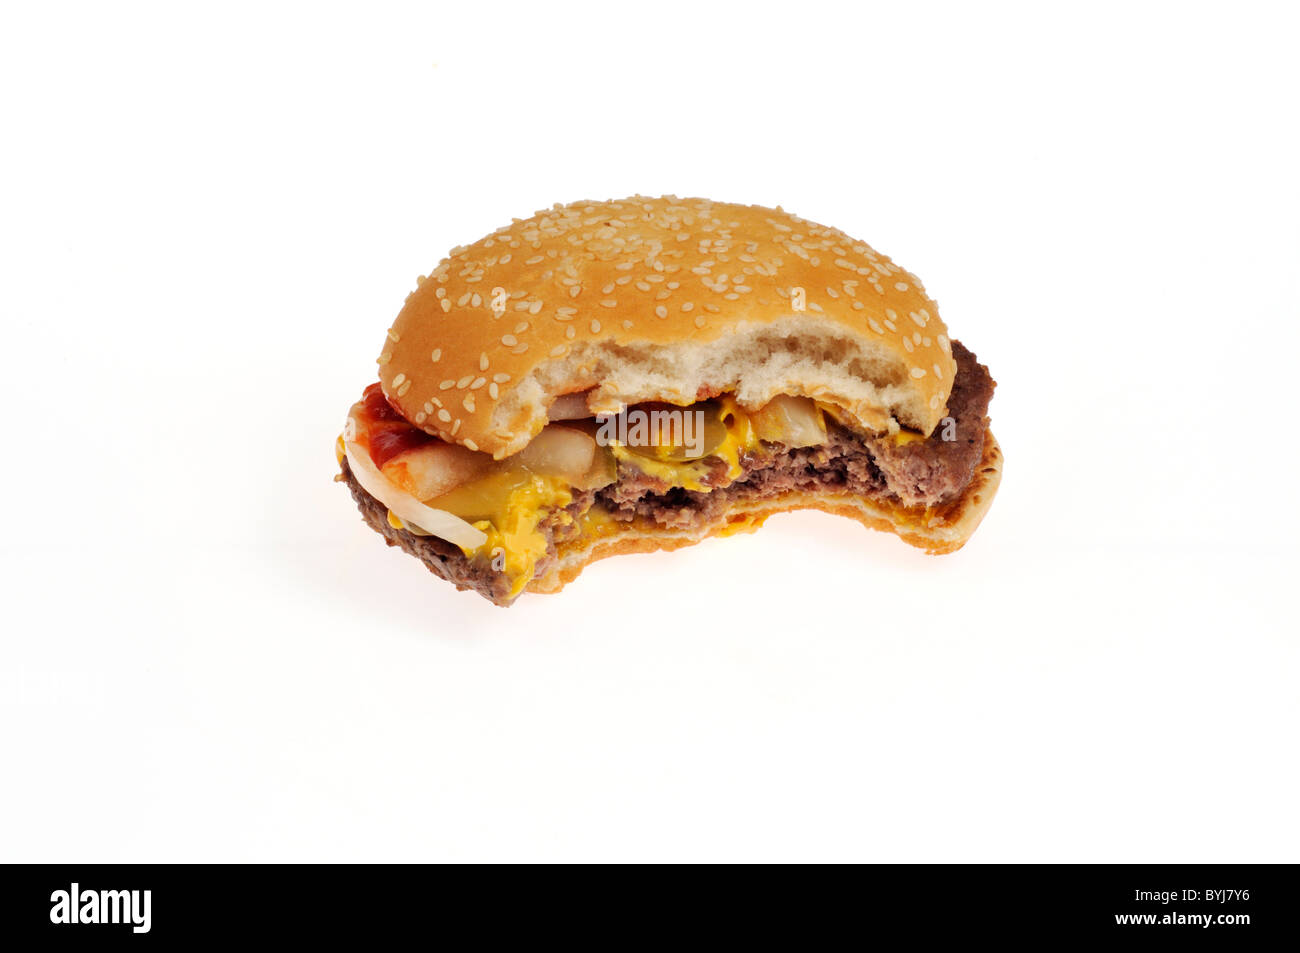 Mcdonald's quarter pounder with cheese with bite in it on white background, isolated. Stock Photo